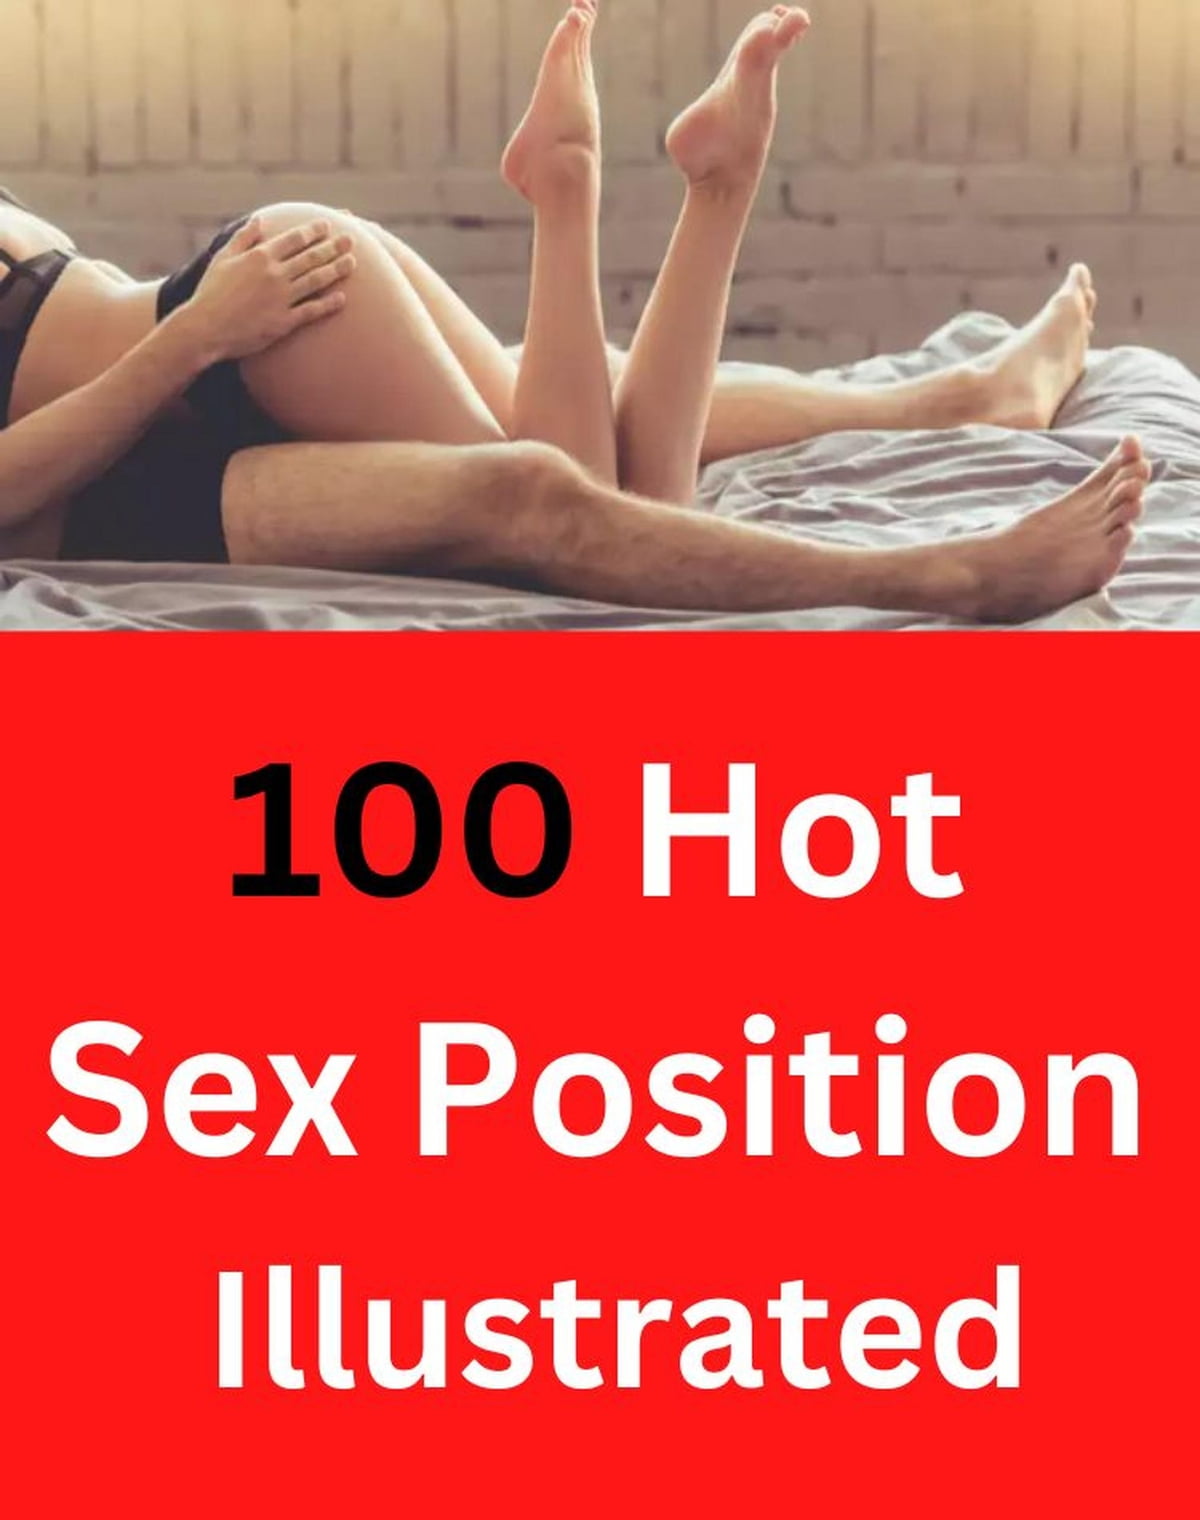 100 Hot Sex Position Illustrated - Enjoy With Your Partner eBook ...